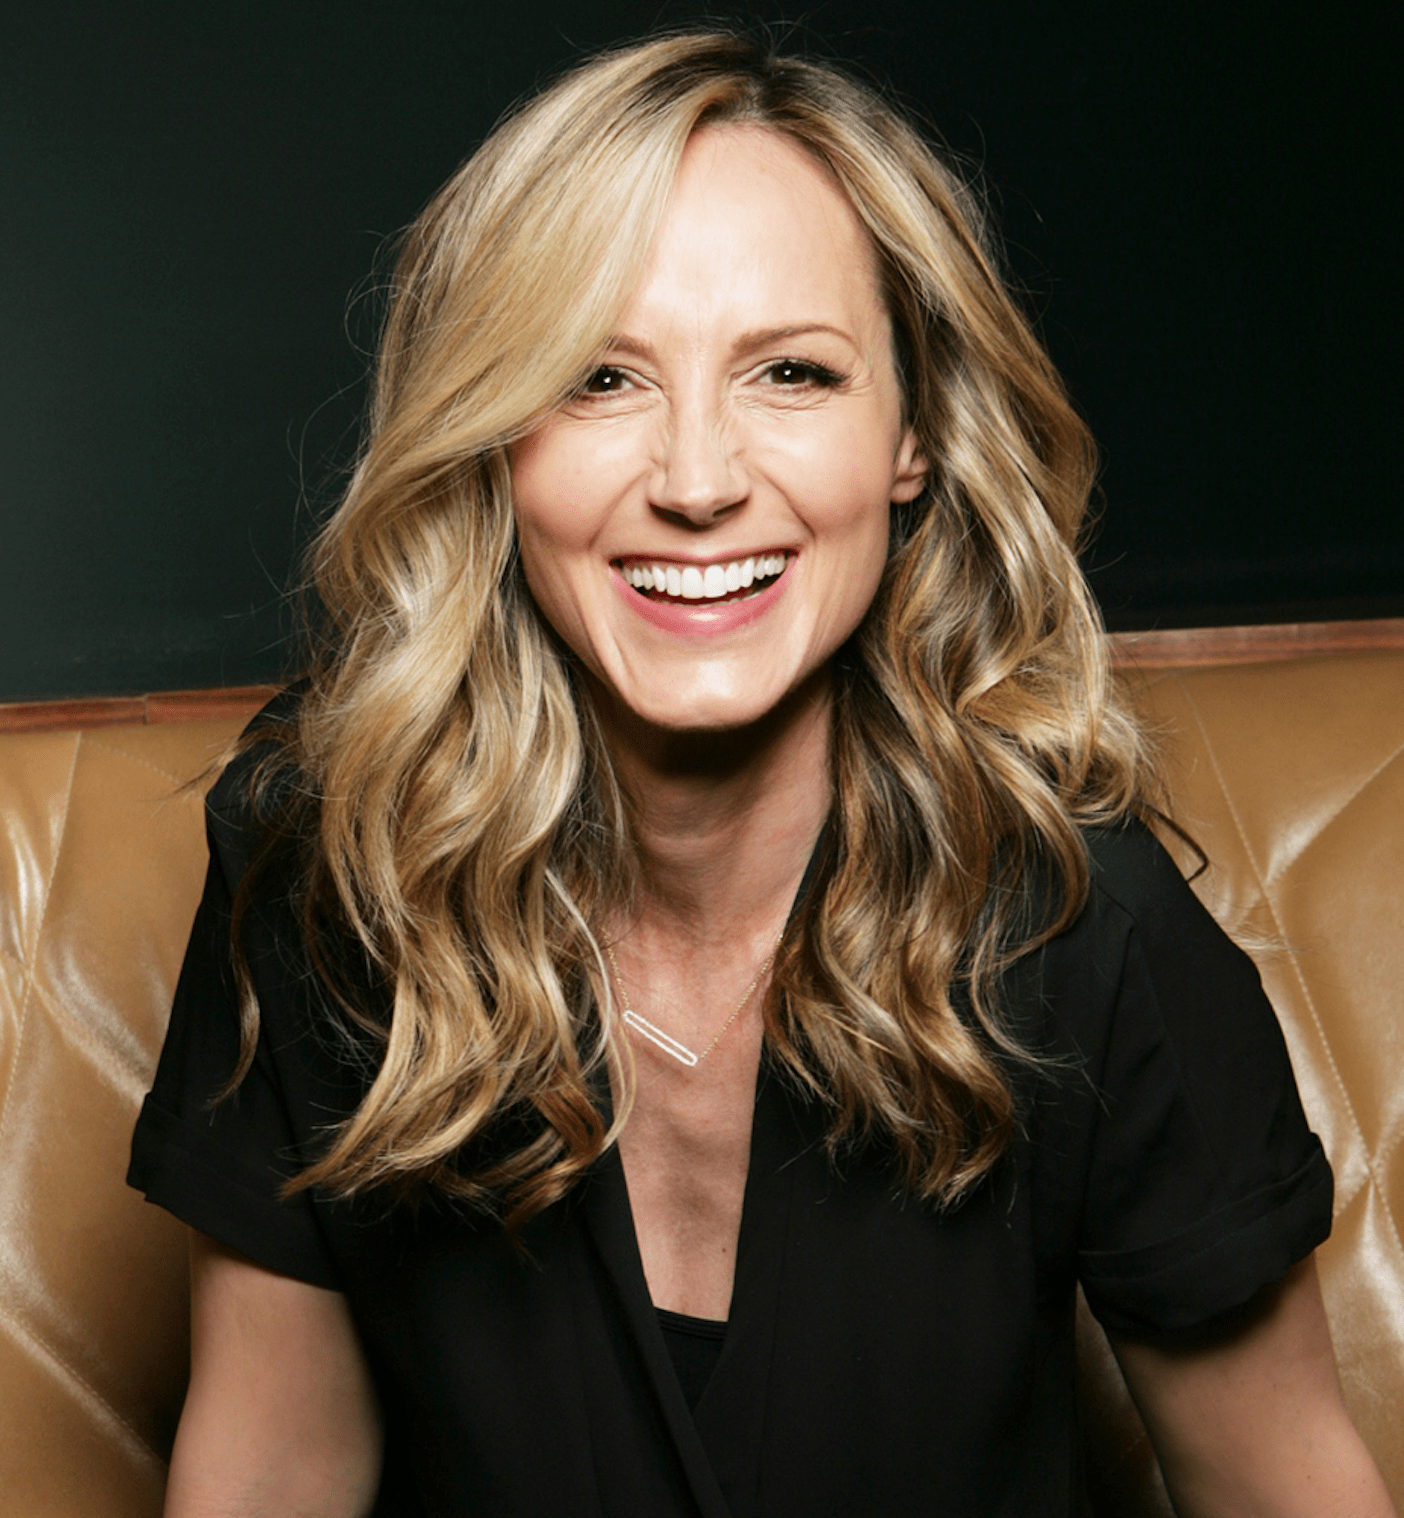 51 Sexy Chely Wright Boobs Pictures That Will Make Your Heart Pound For Her | Best Of Comic Books